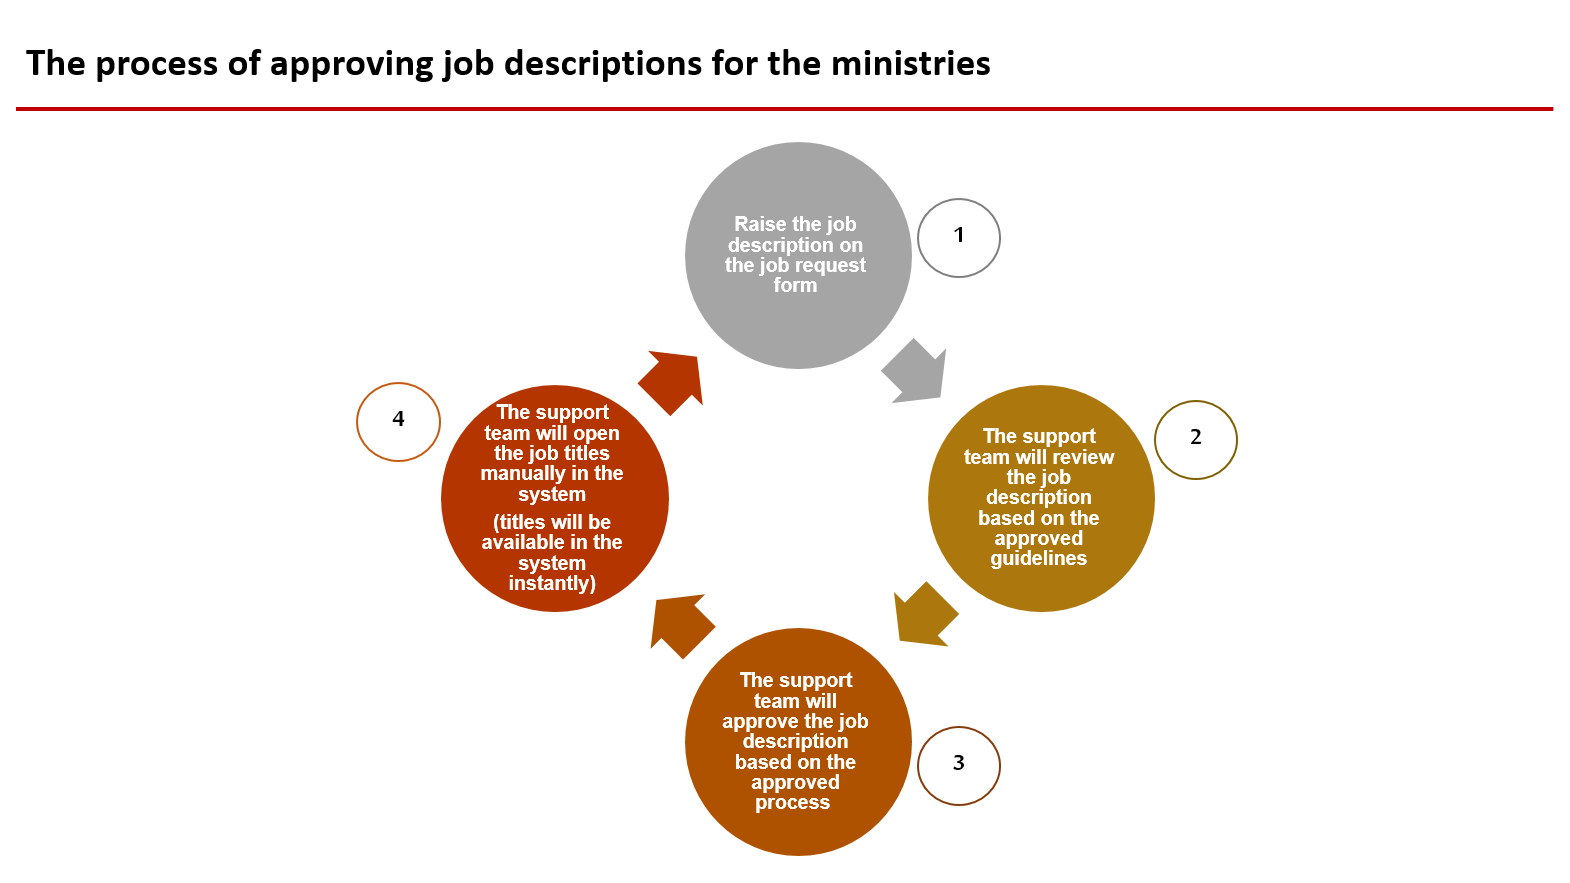 The process of approving job descriptions for the ministries